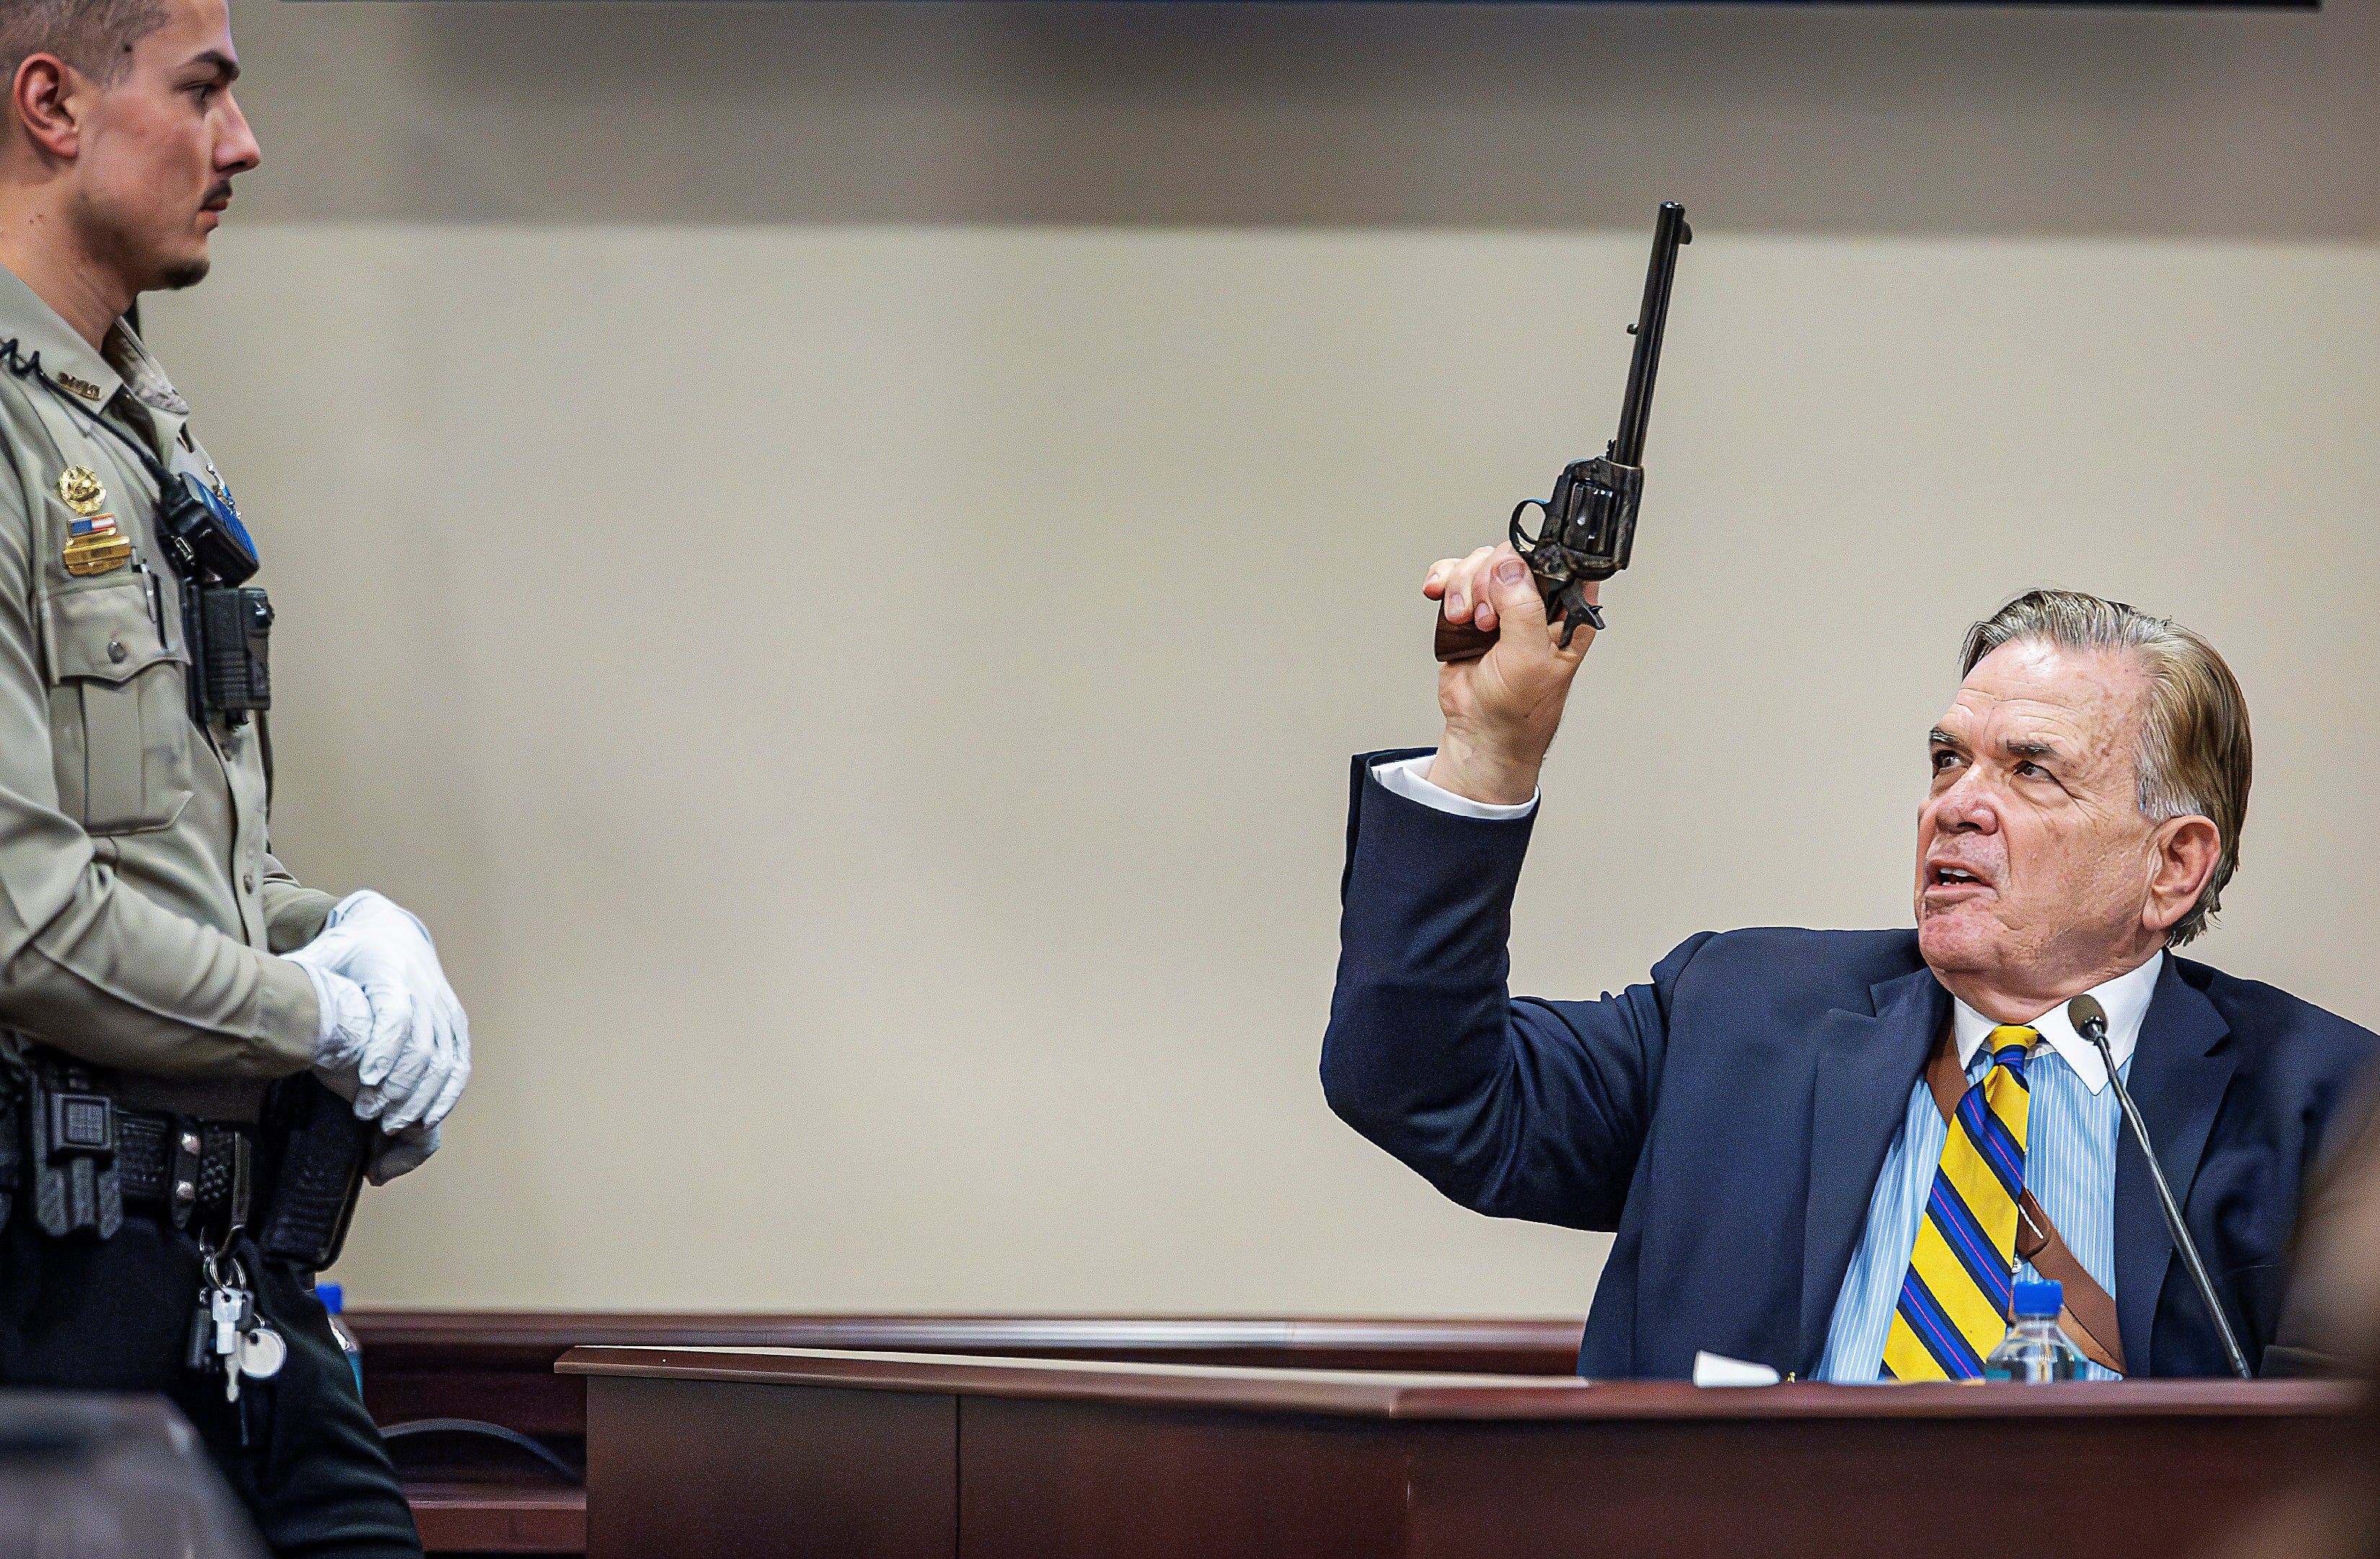 Santa Fe County Deputy Levi Abeyta, left, watches as expert witness for the defense Frank Koucky III demonstrates how to uncock a gun like the one used on the set of the movie ‘Rust’